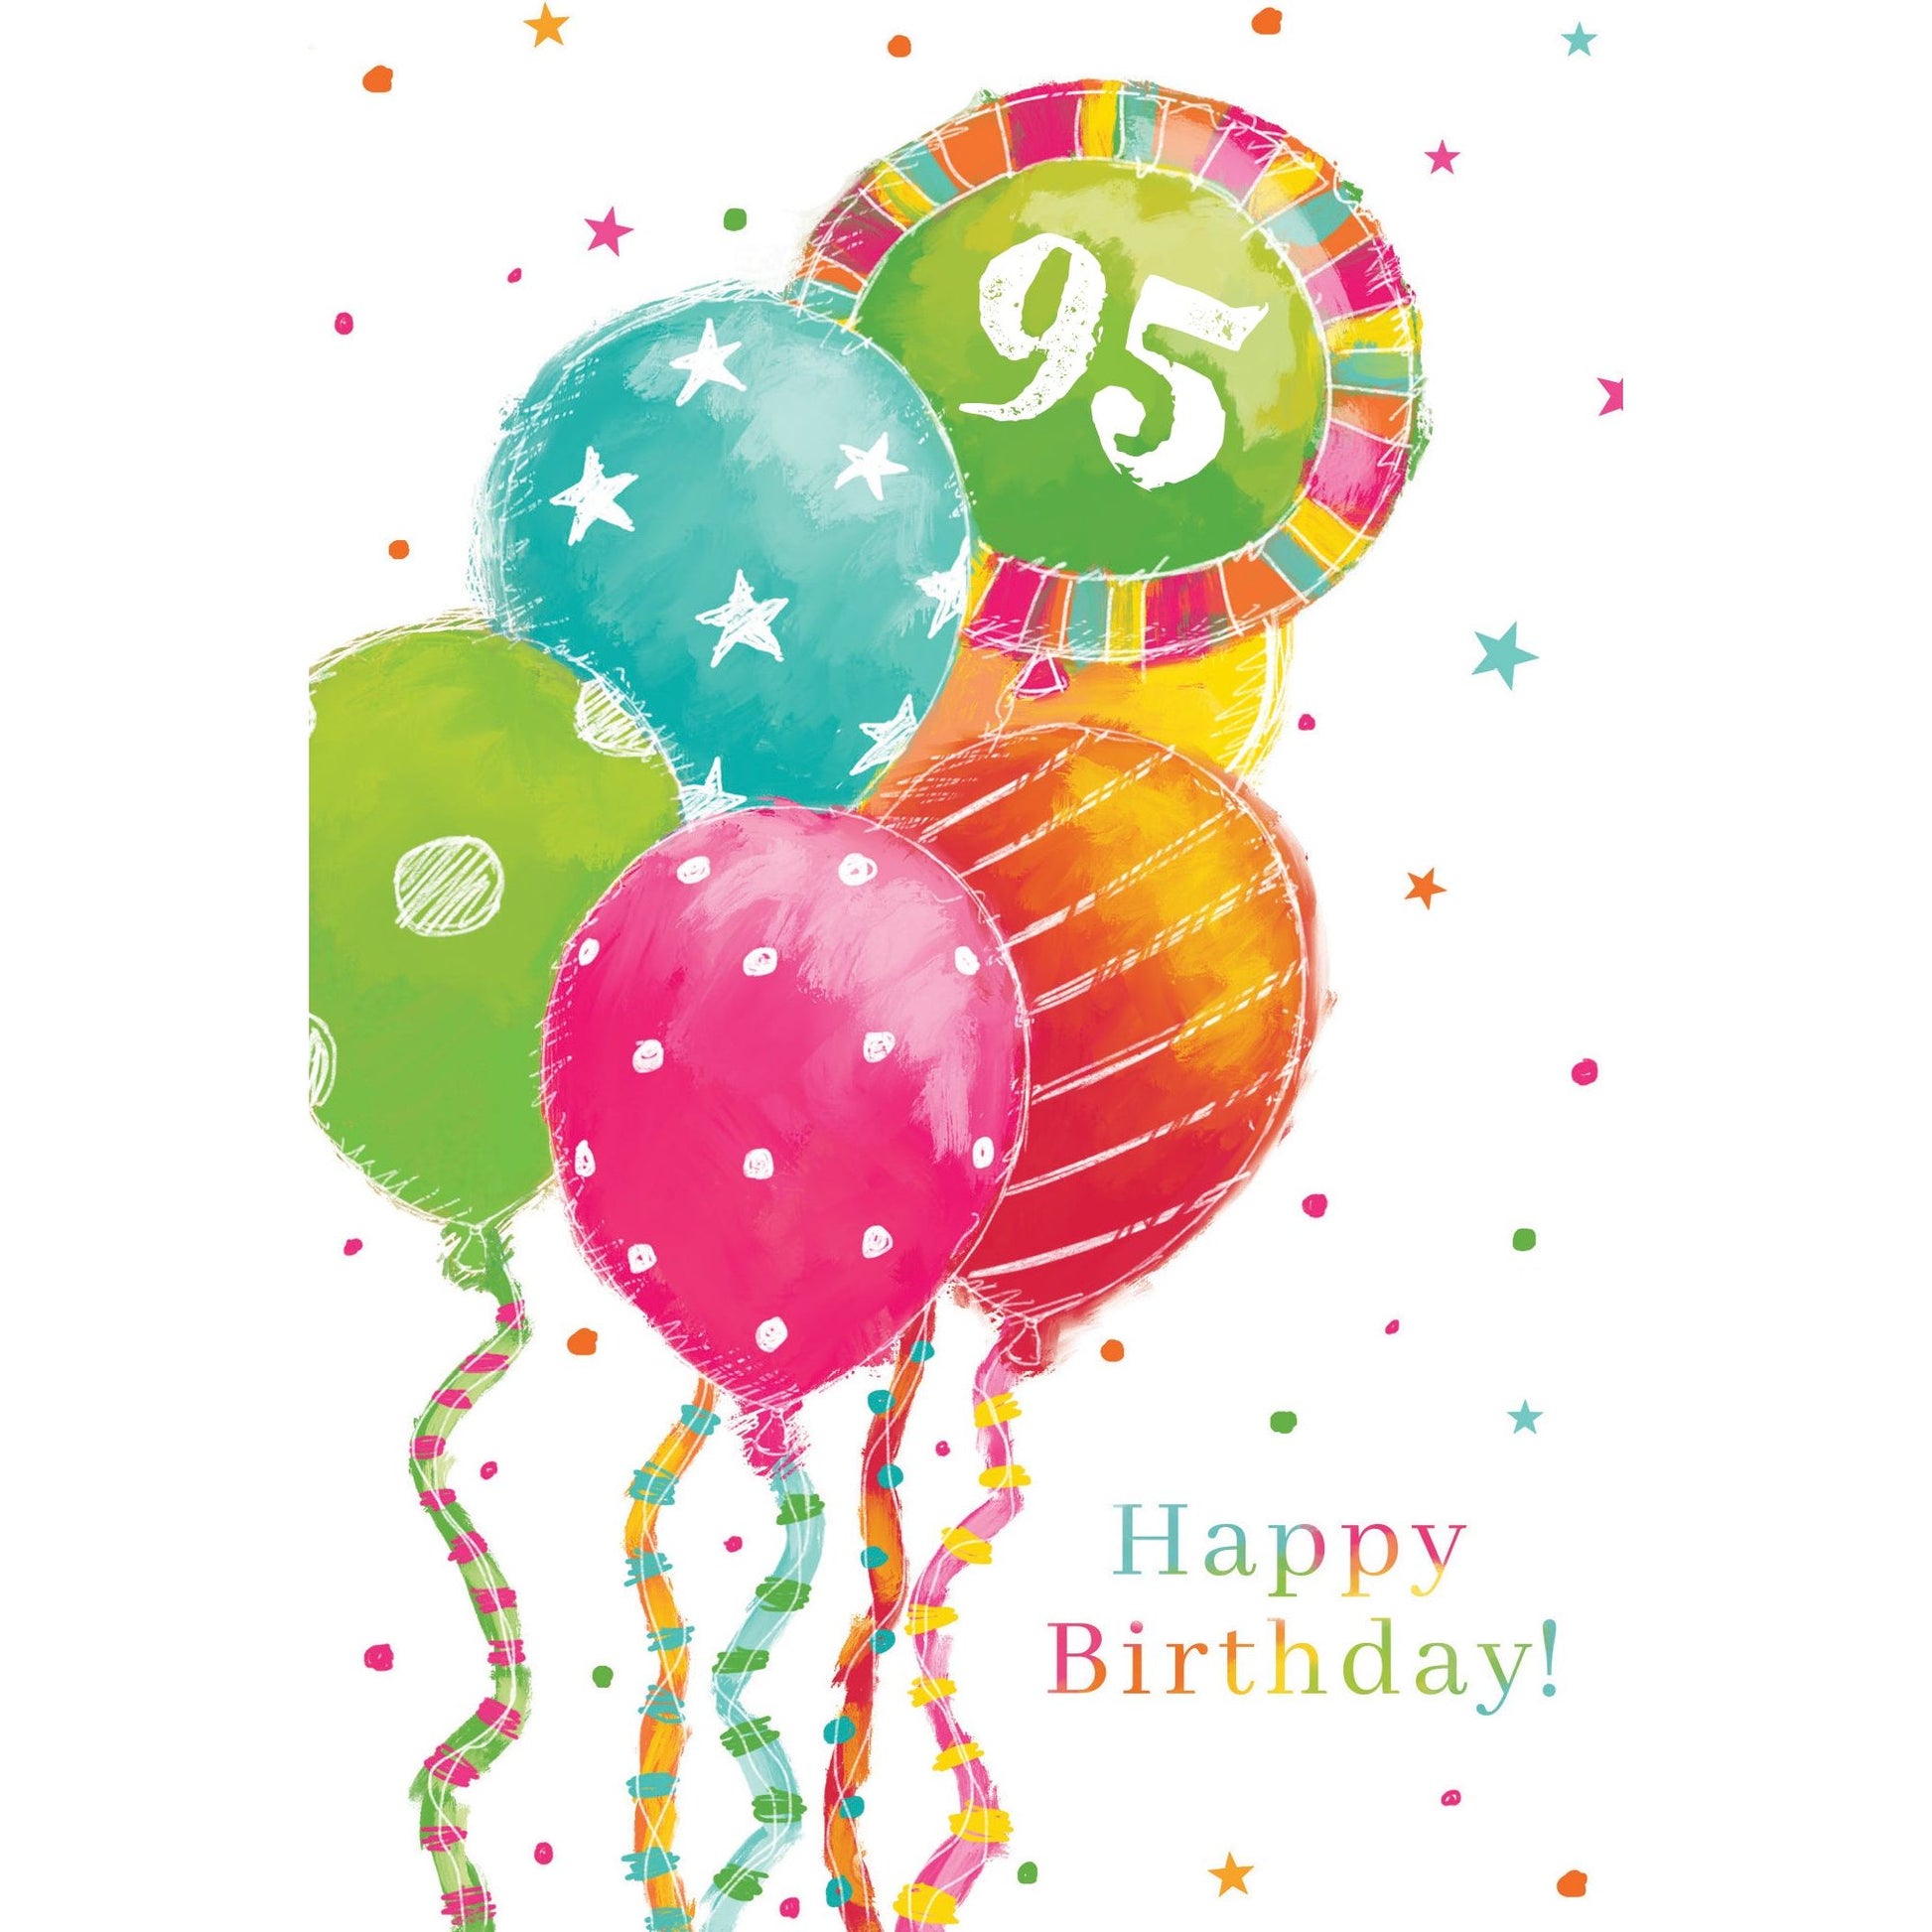 95th Birthday Card with colorful balloons - Cardmore